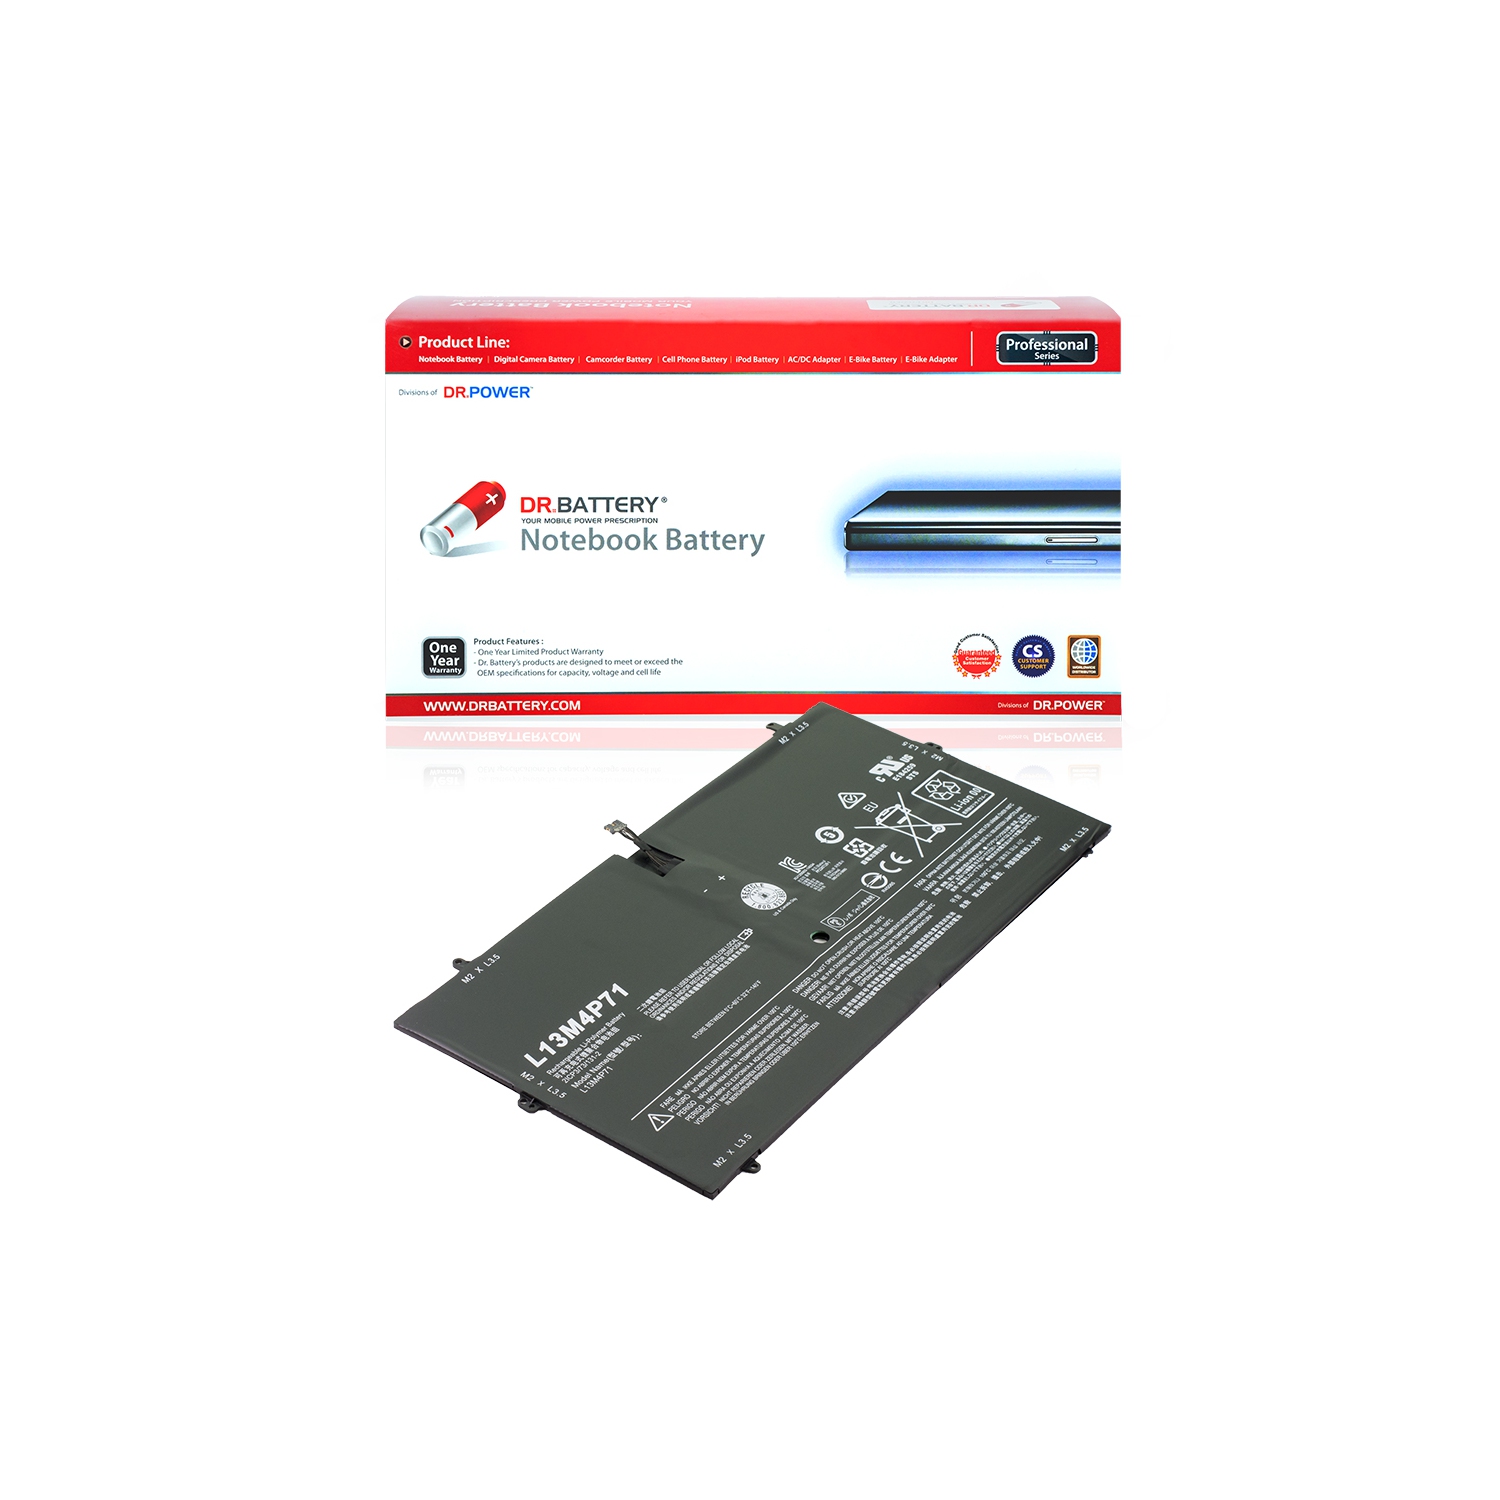 DR. BATTERY - Replacement for Lenovo Yoga 3 Pro-I5Y70(F) / Pro-I5Y70(L) / Pro-I5Y71 / Pro-5Y71 / L13M4P71 / L14S4P71